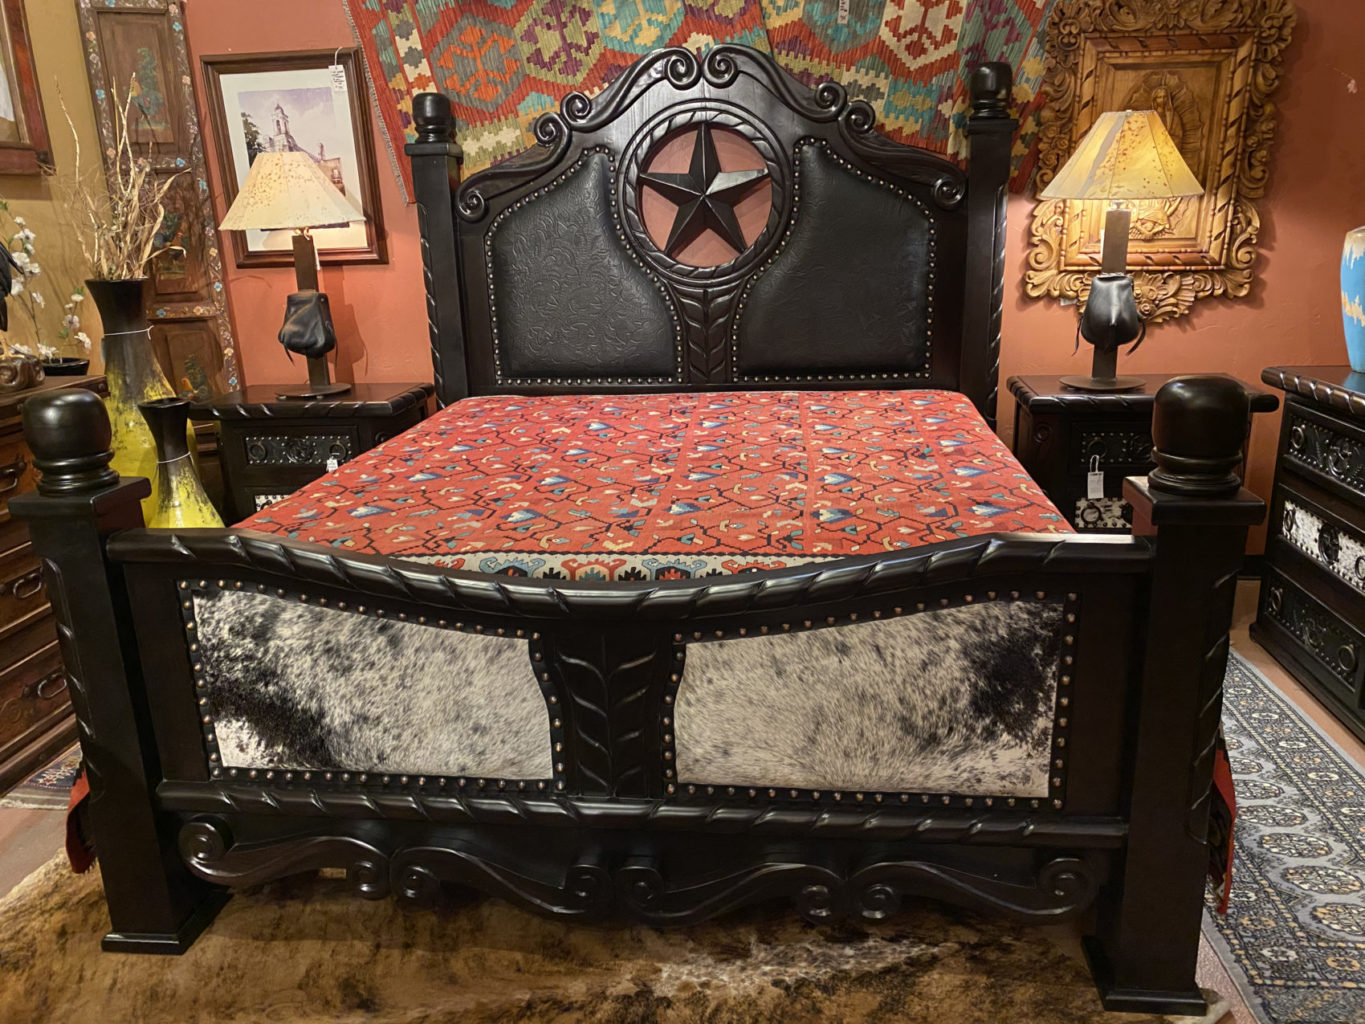 Texas Lone Star bed with Cowhide, in Black